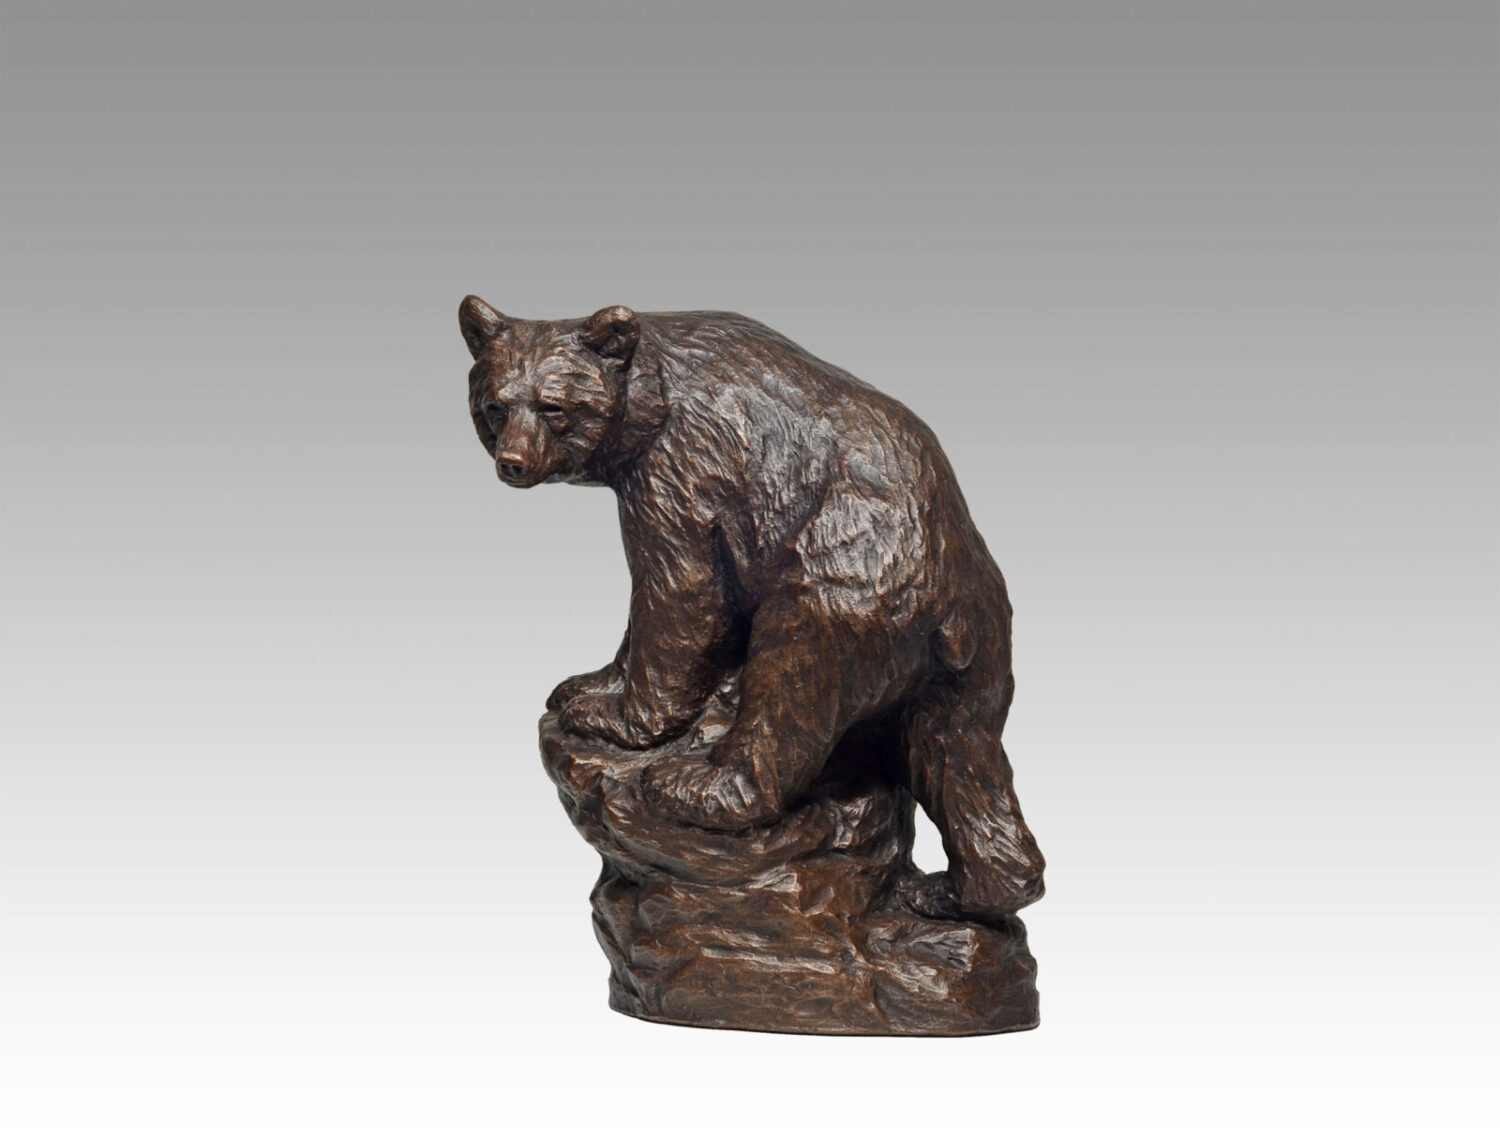 Gallery, Spirit Bear, $260 CAD, Metal Infused, 9 ½” H, Edition 60, Wildlife Sculpture of a spirit bear, Sculptor Tyler Fauvelle